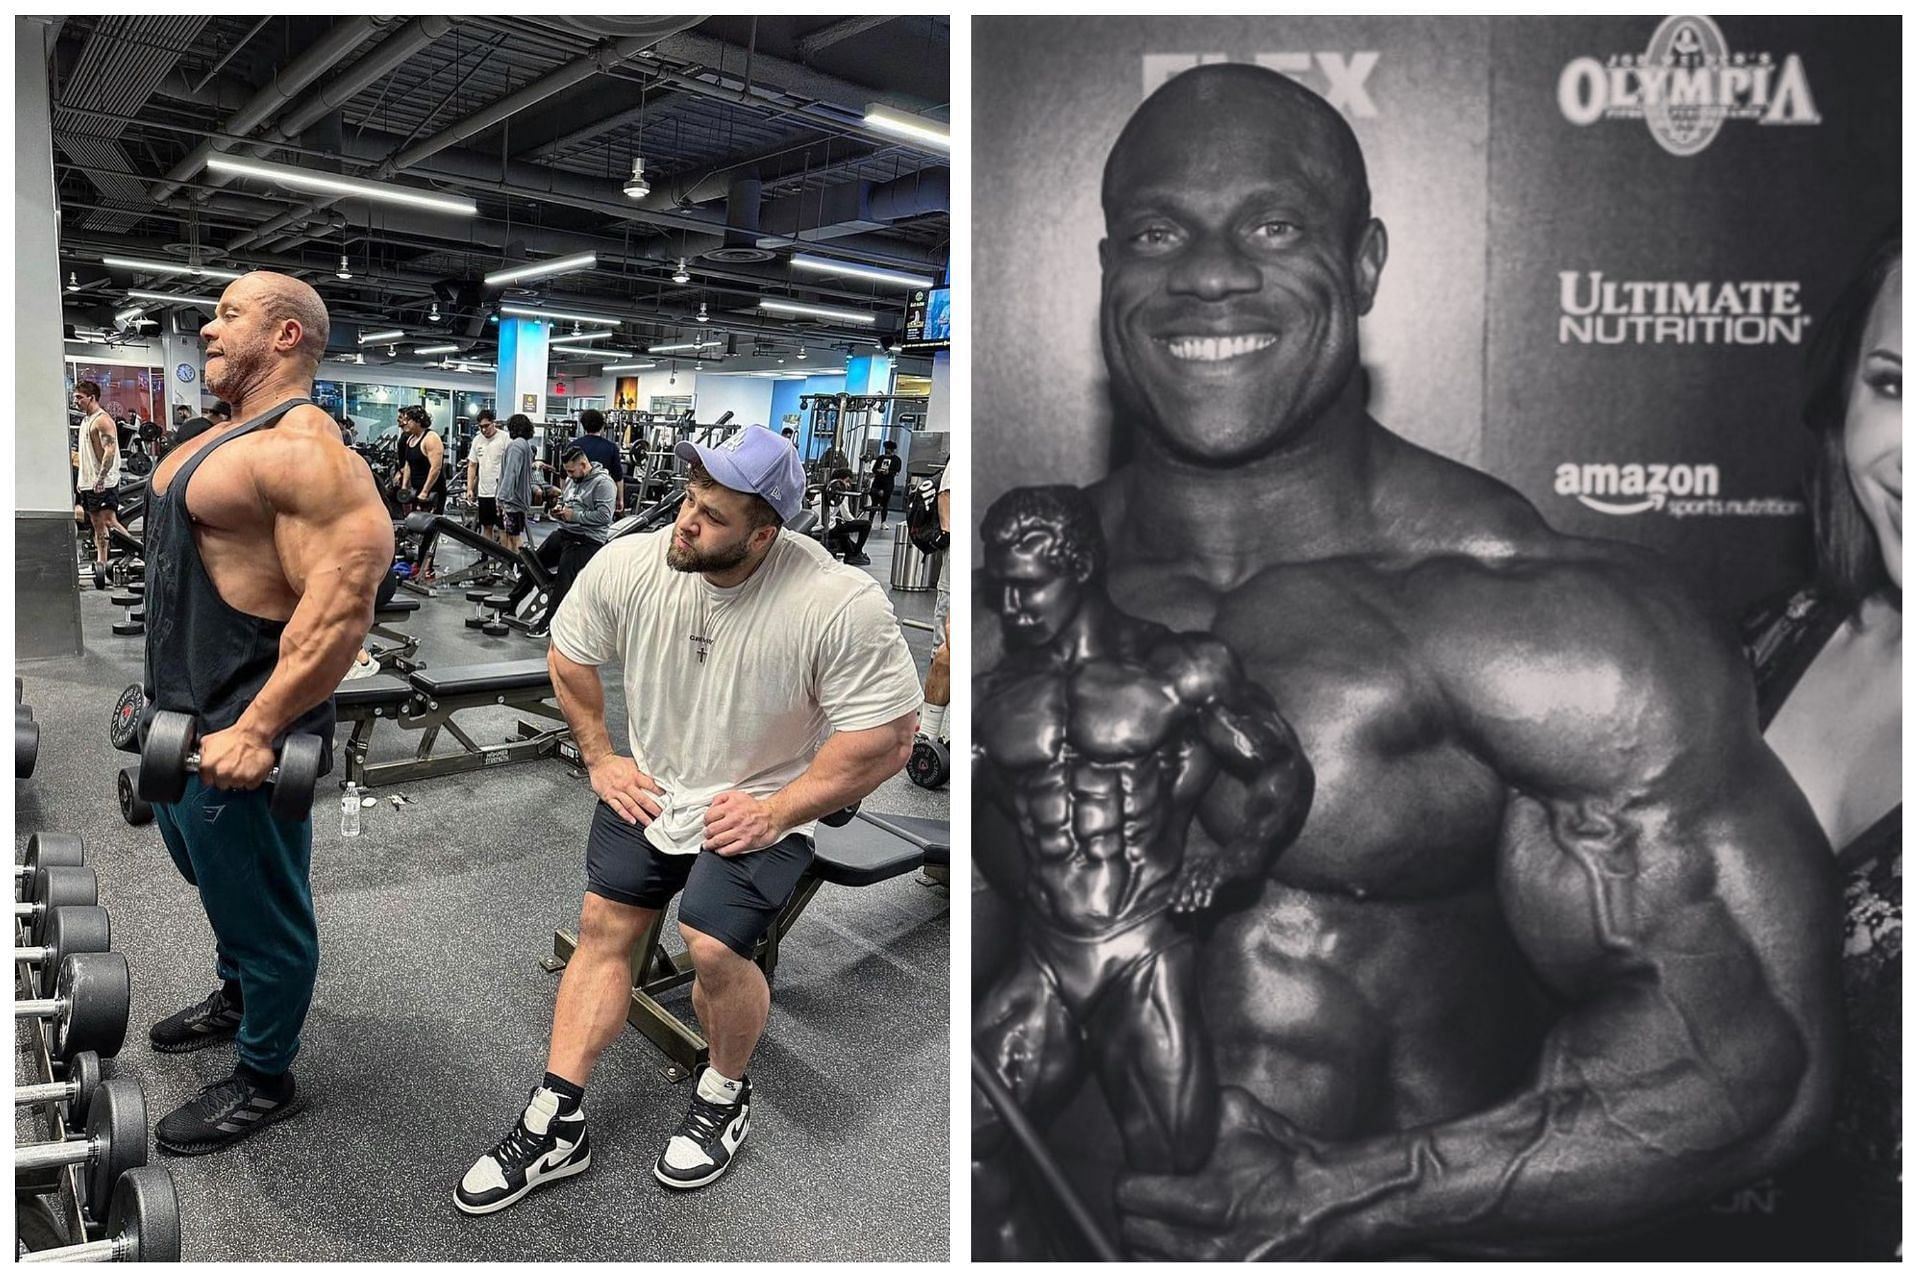 Six-time Mr. Olympia winner Phil Heath poses in the gym and with the Sandow trophy: Image via Instagram (@philheath)